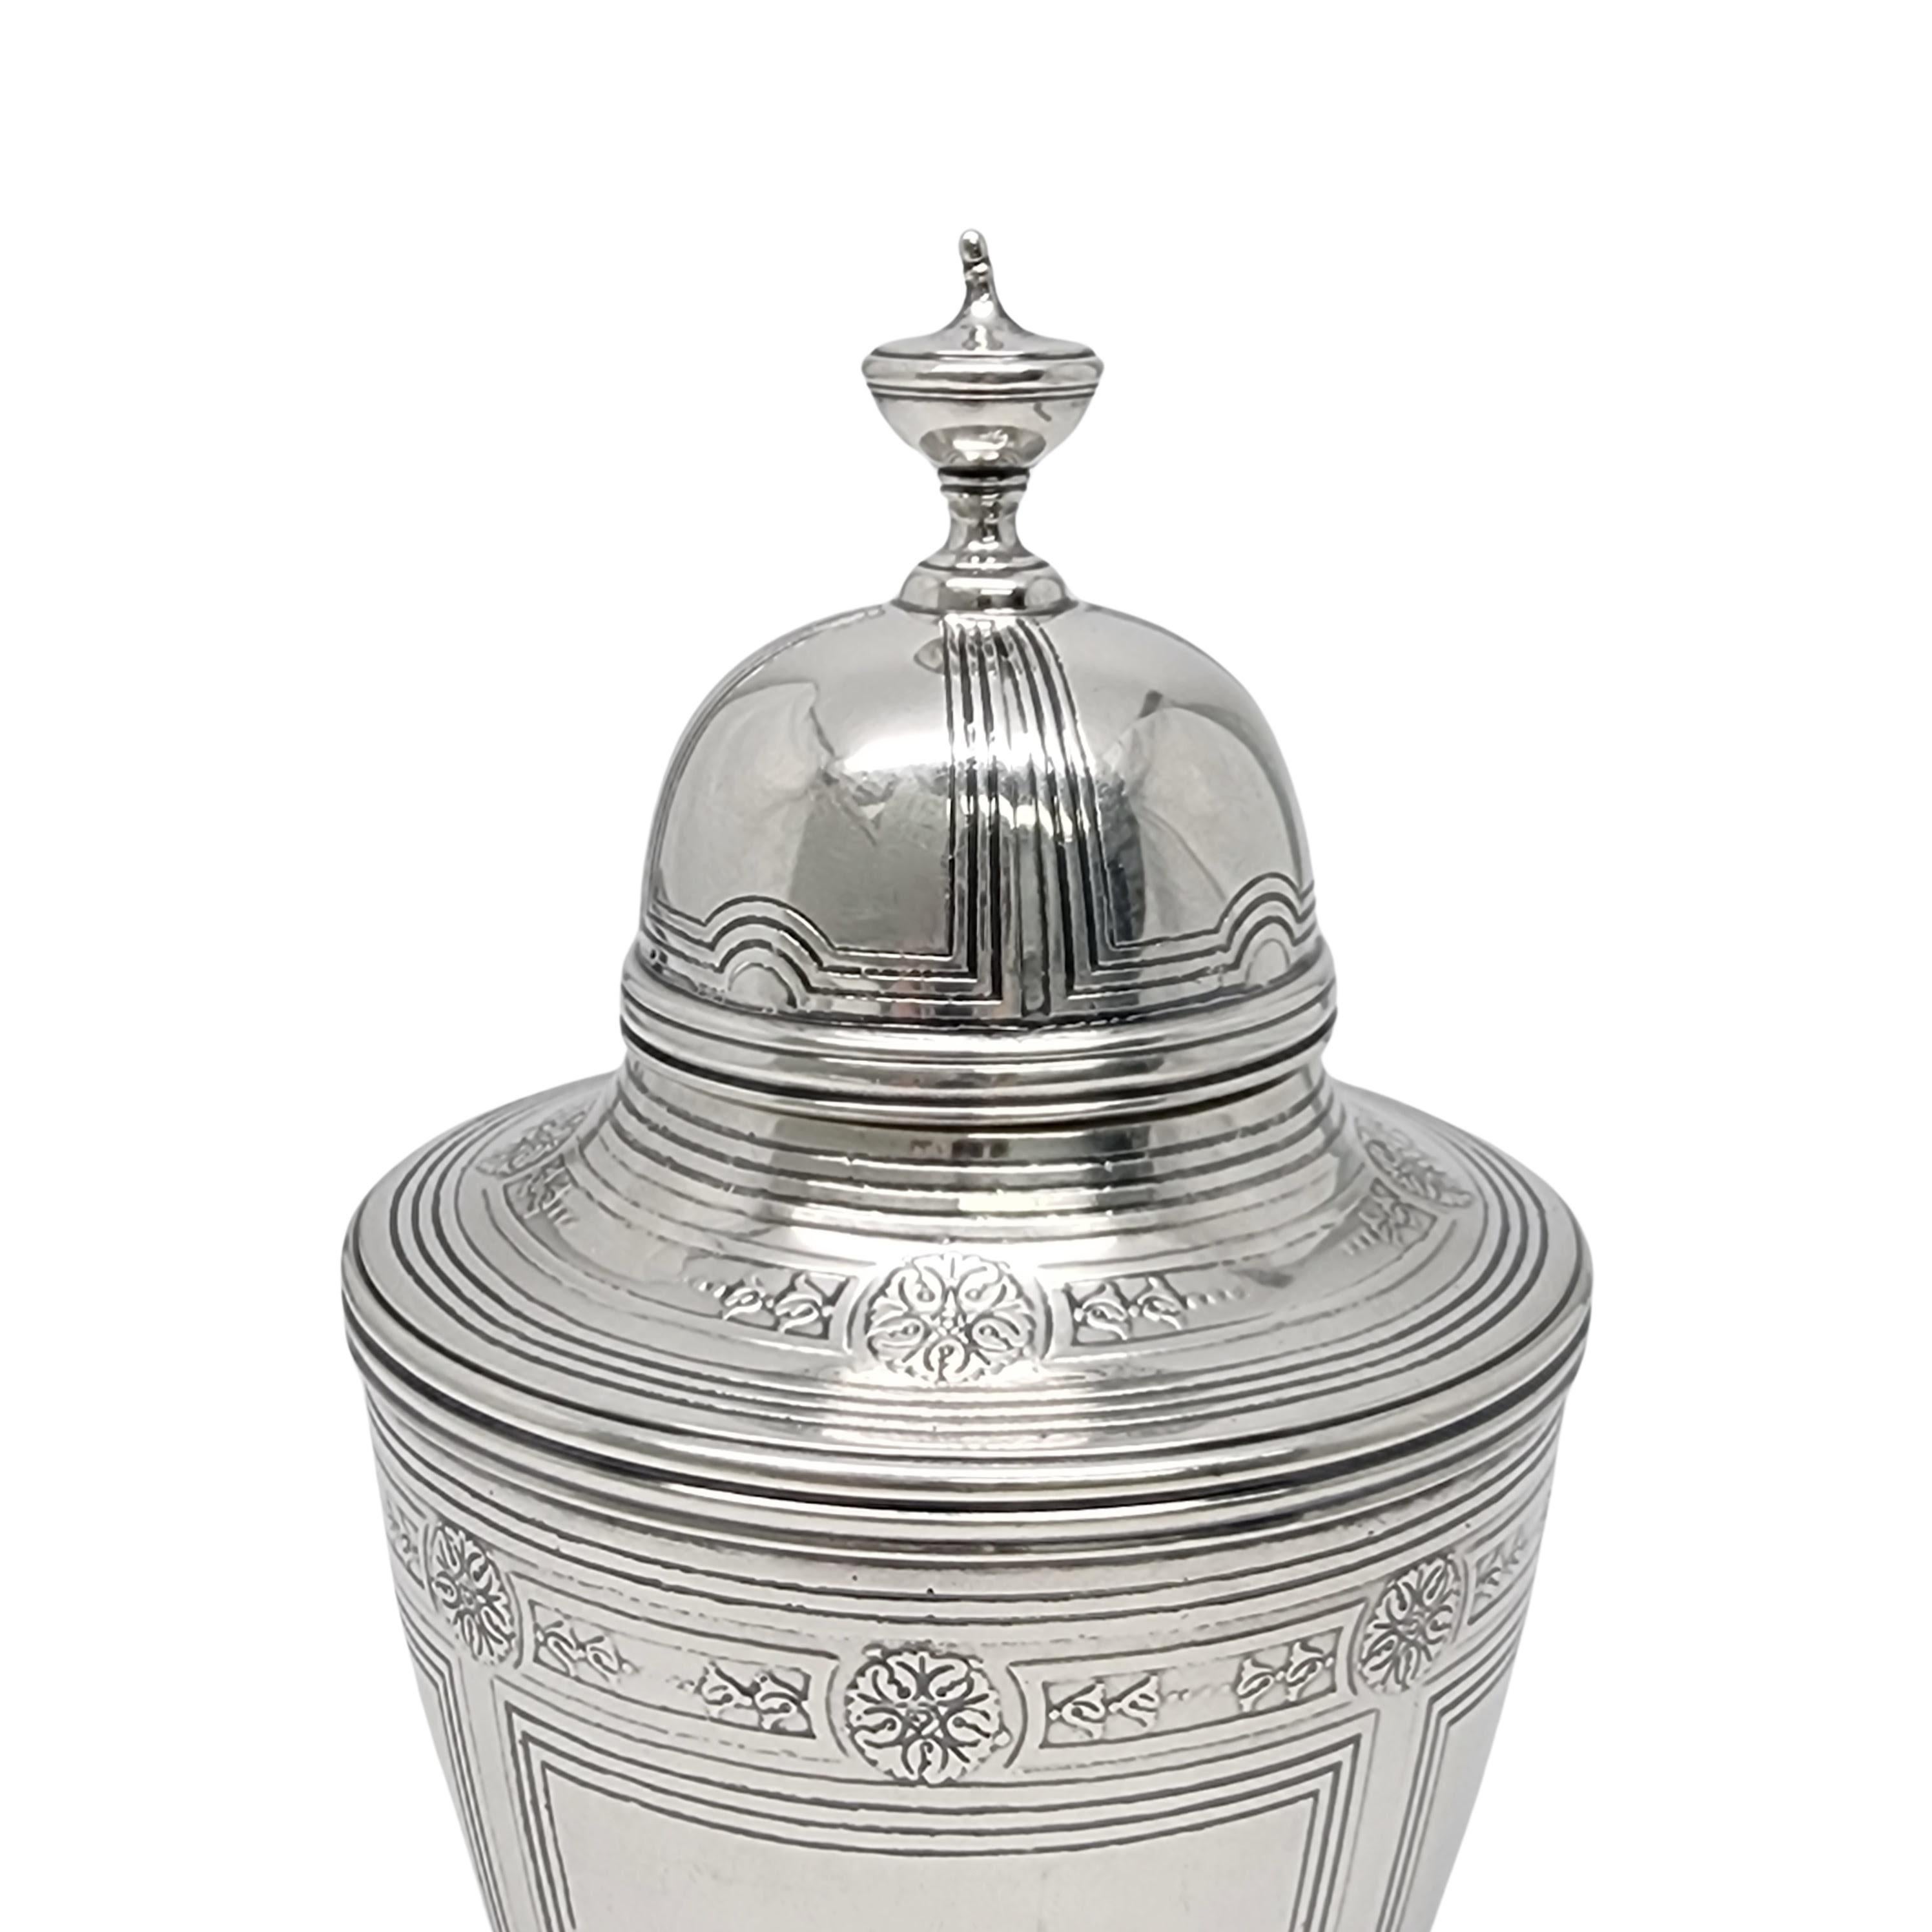 Tiffany & Co Sterling Silver Tea Caddy with Monogram #16850 For Sale 1